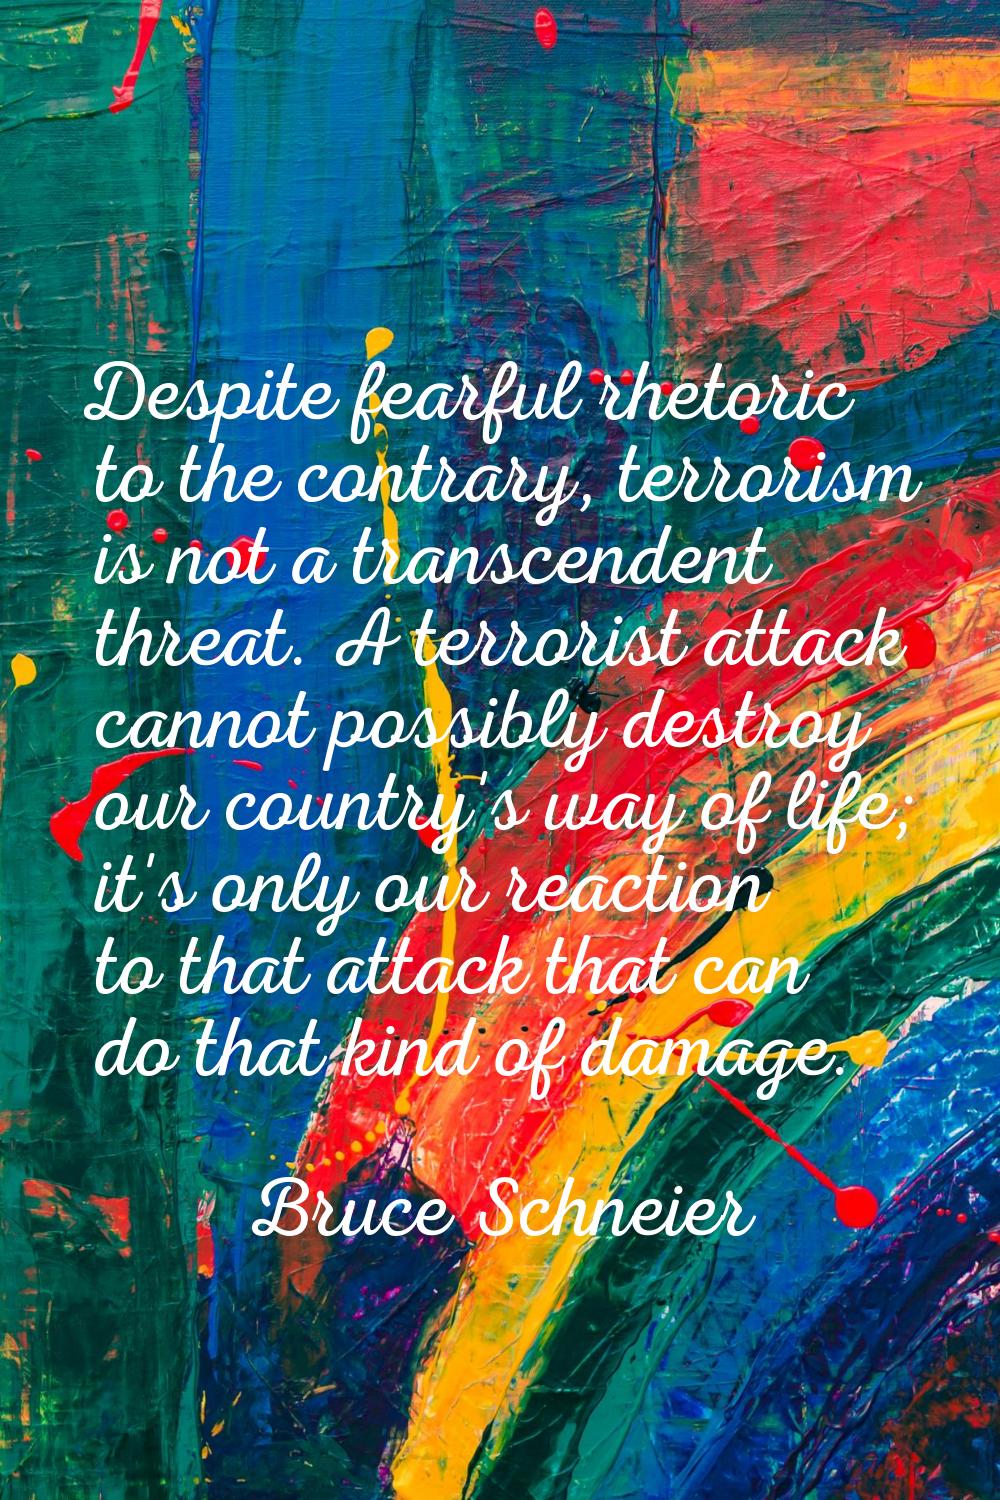 Despite fearful rhetoric to the contrary, terrorism is not a transcendent threat. A terrorist attac